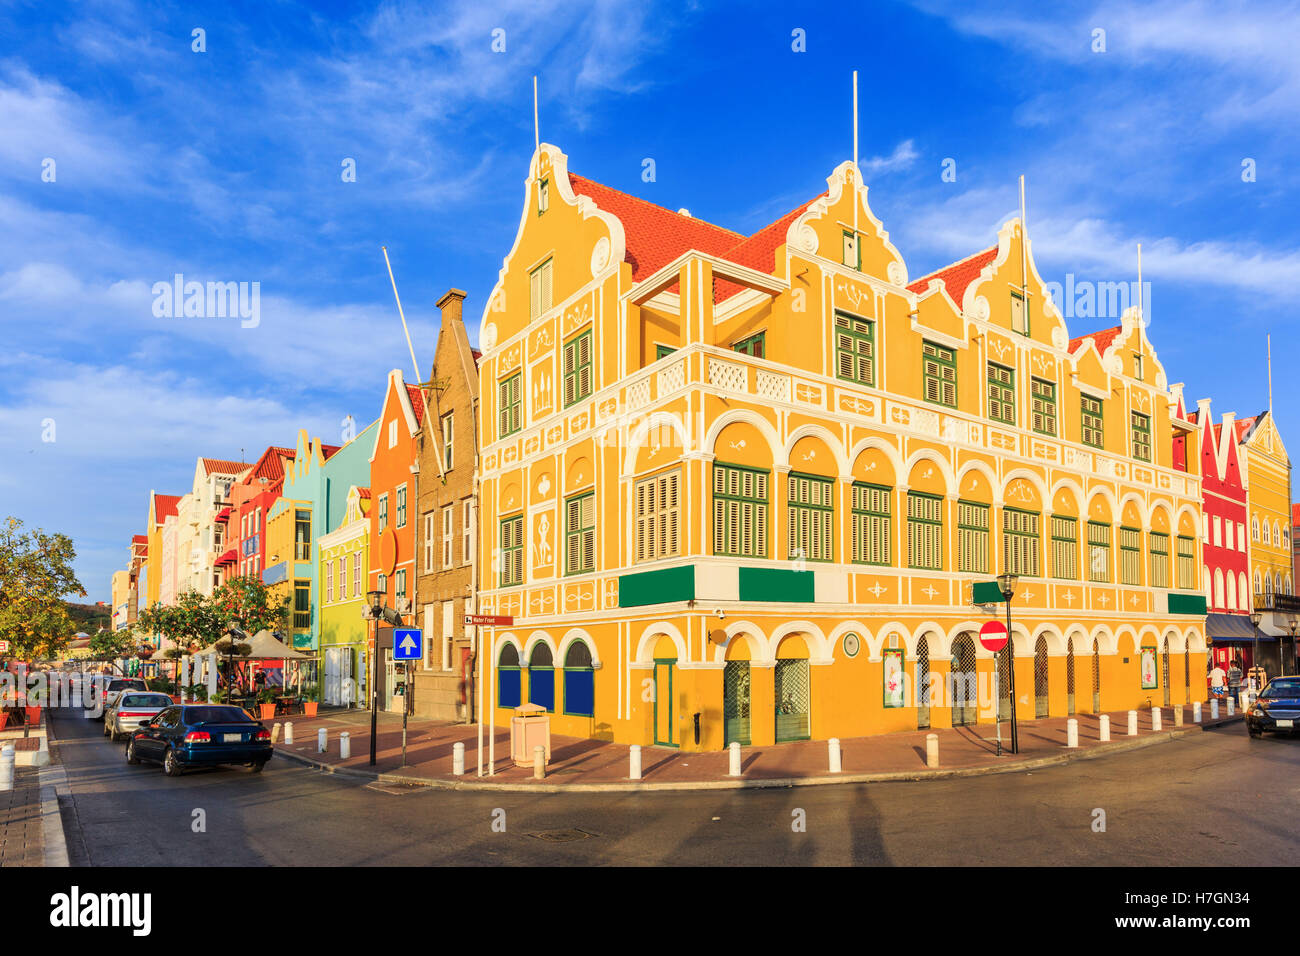 Colonial houses in Willemstad. Curacao, Netherlands Antilles Stock Photo